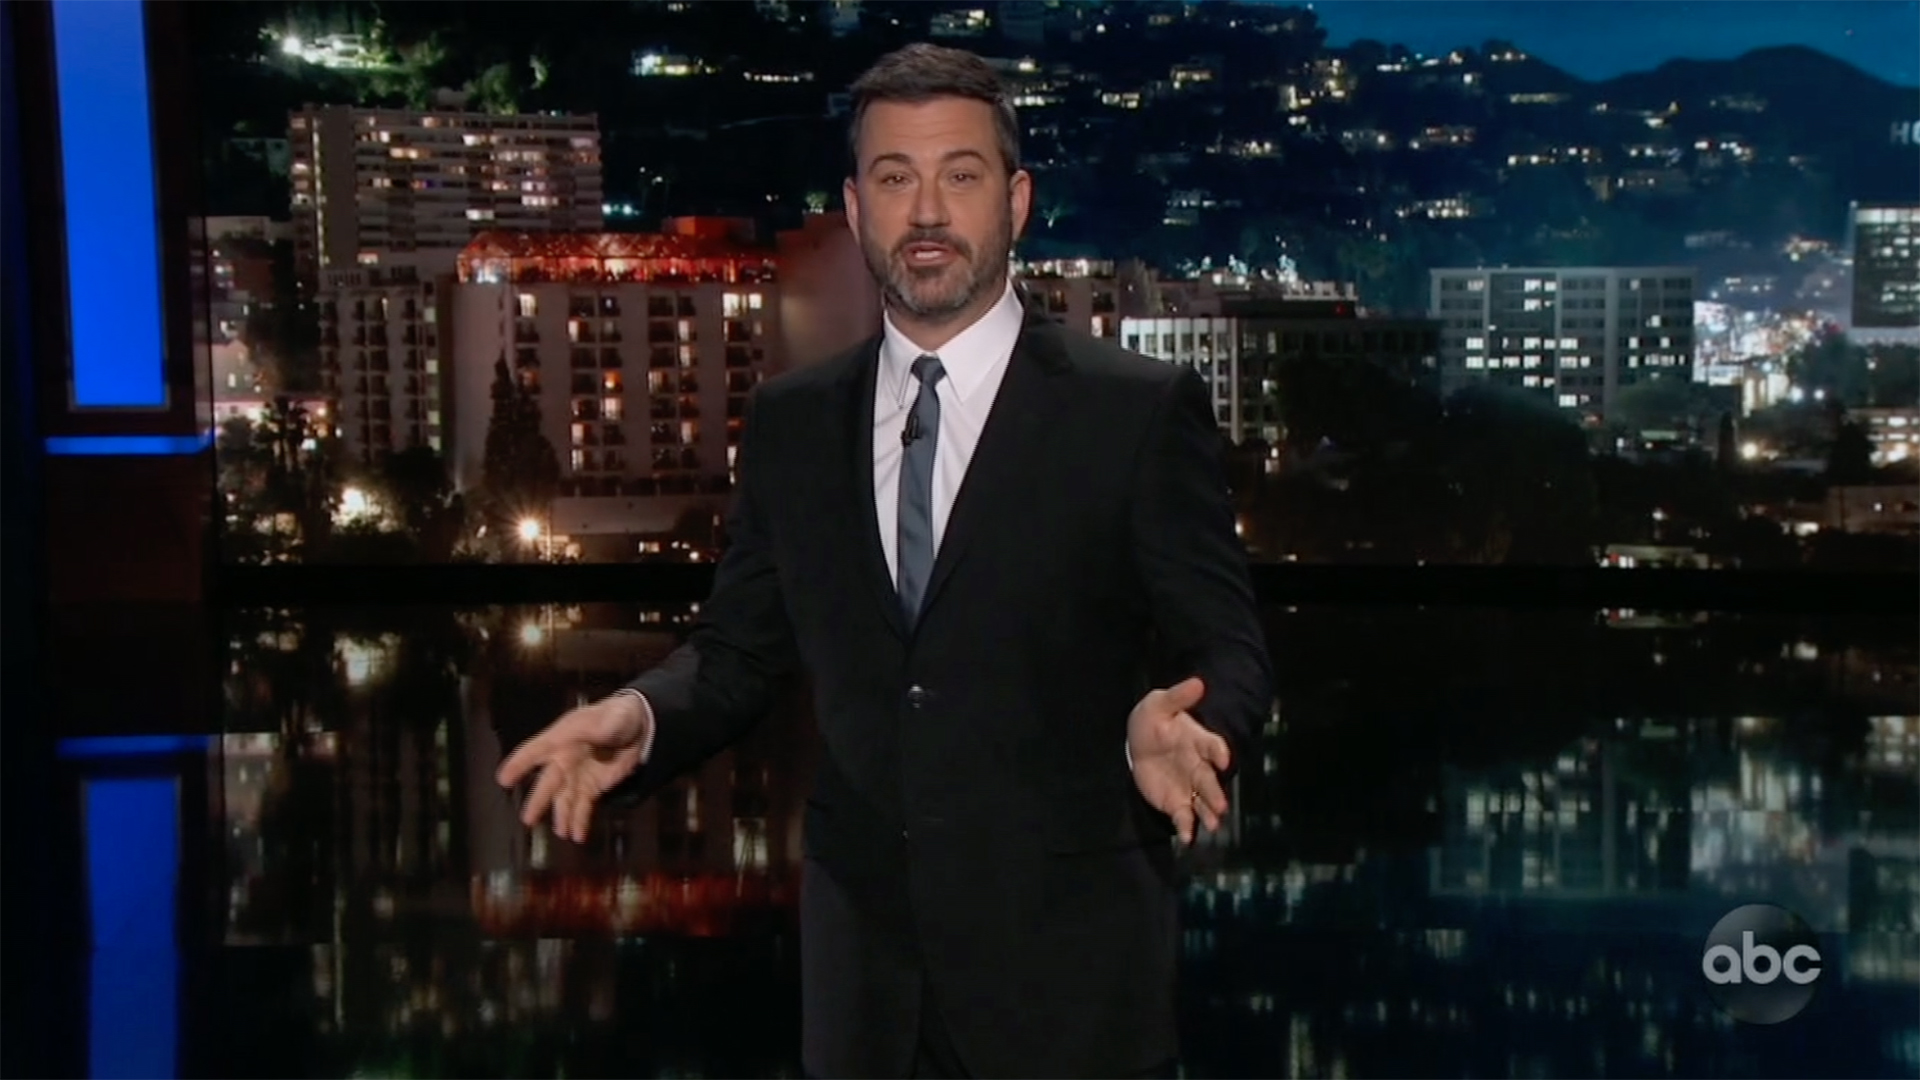 When Americans watch late-night comedy, the joke's on Donald Trump